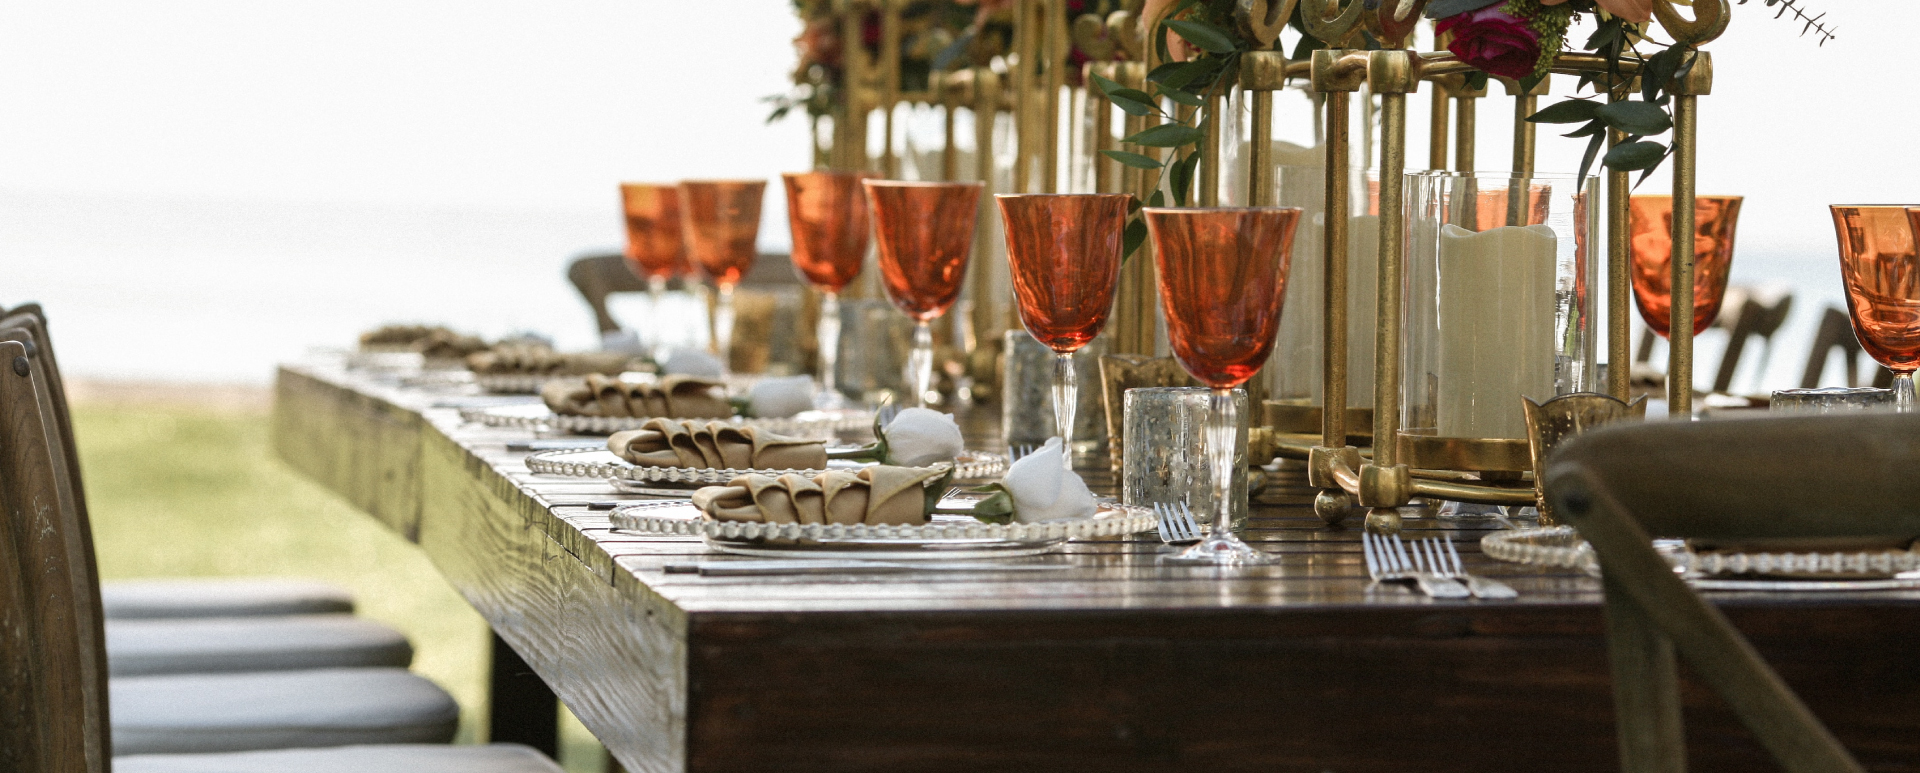 A wood table at a special event set with orange wine glasses, candles, and flowers.